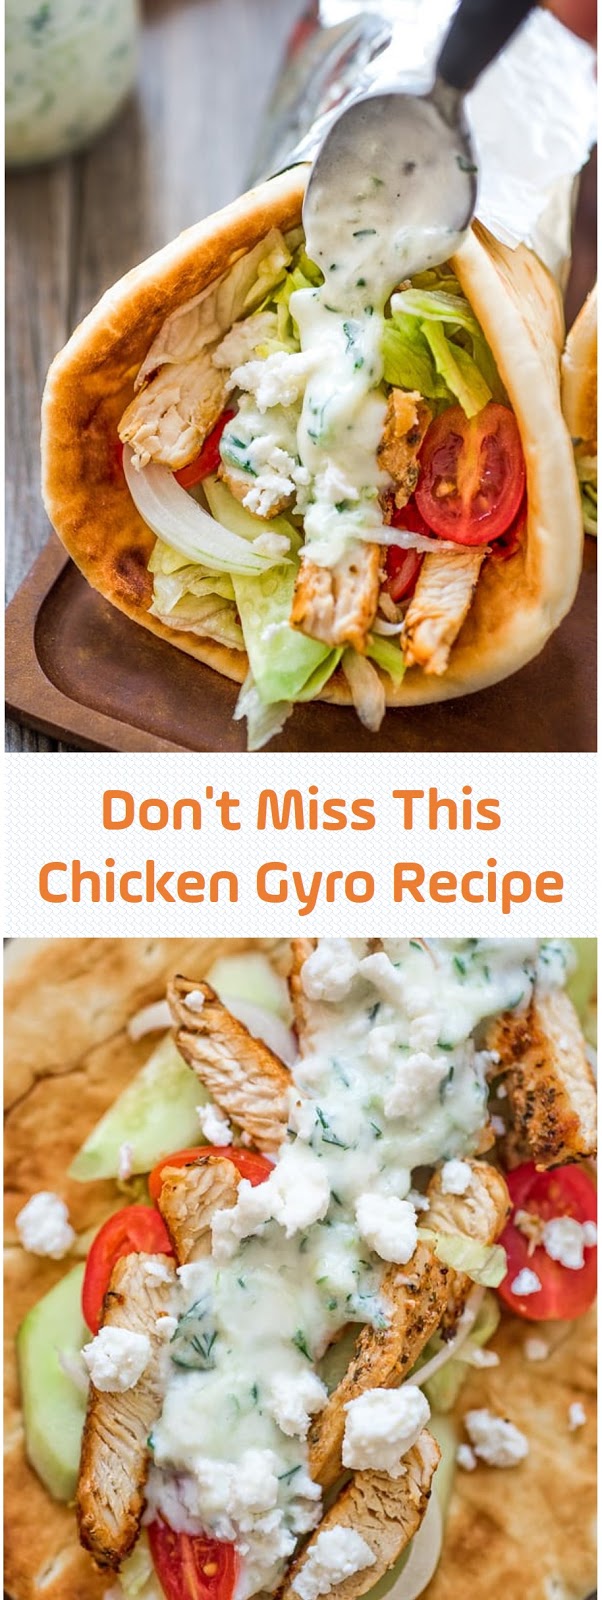 Don't Miss This Chicken Gyro Recipe